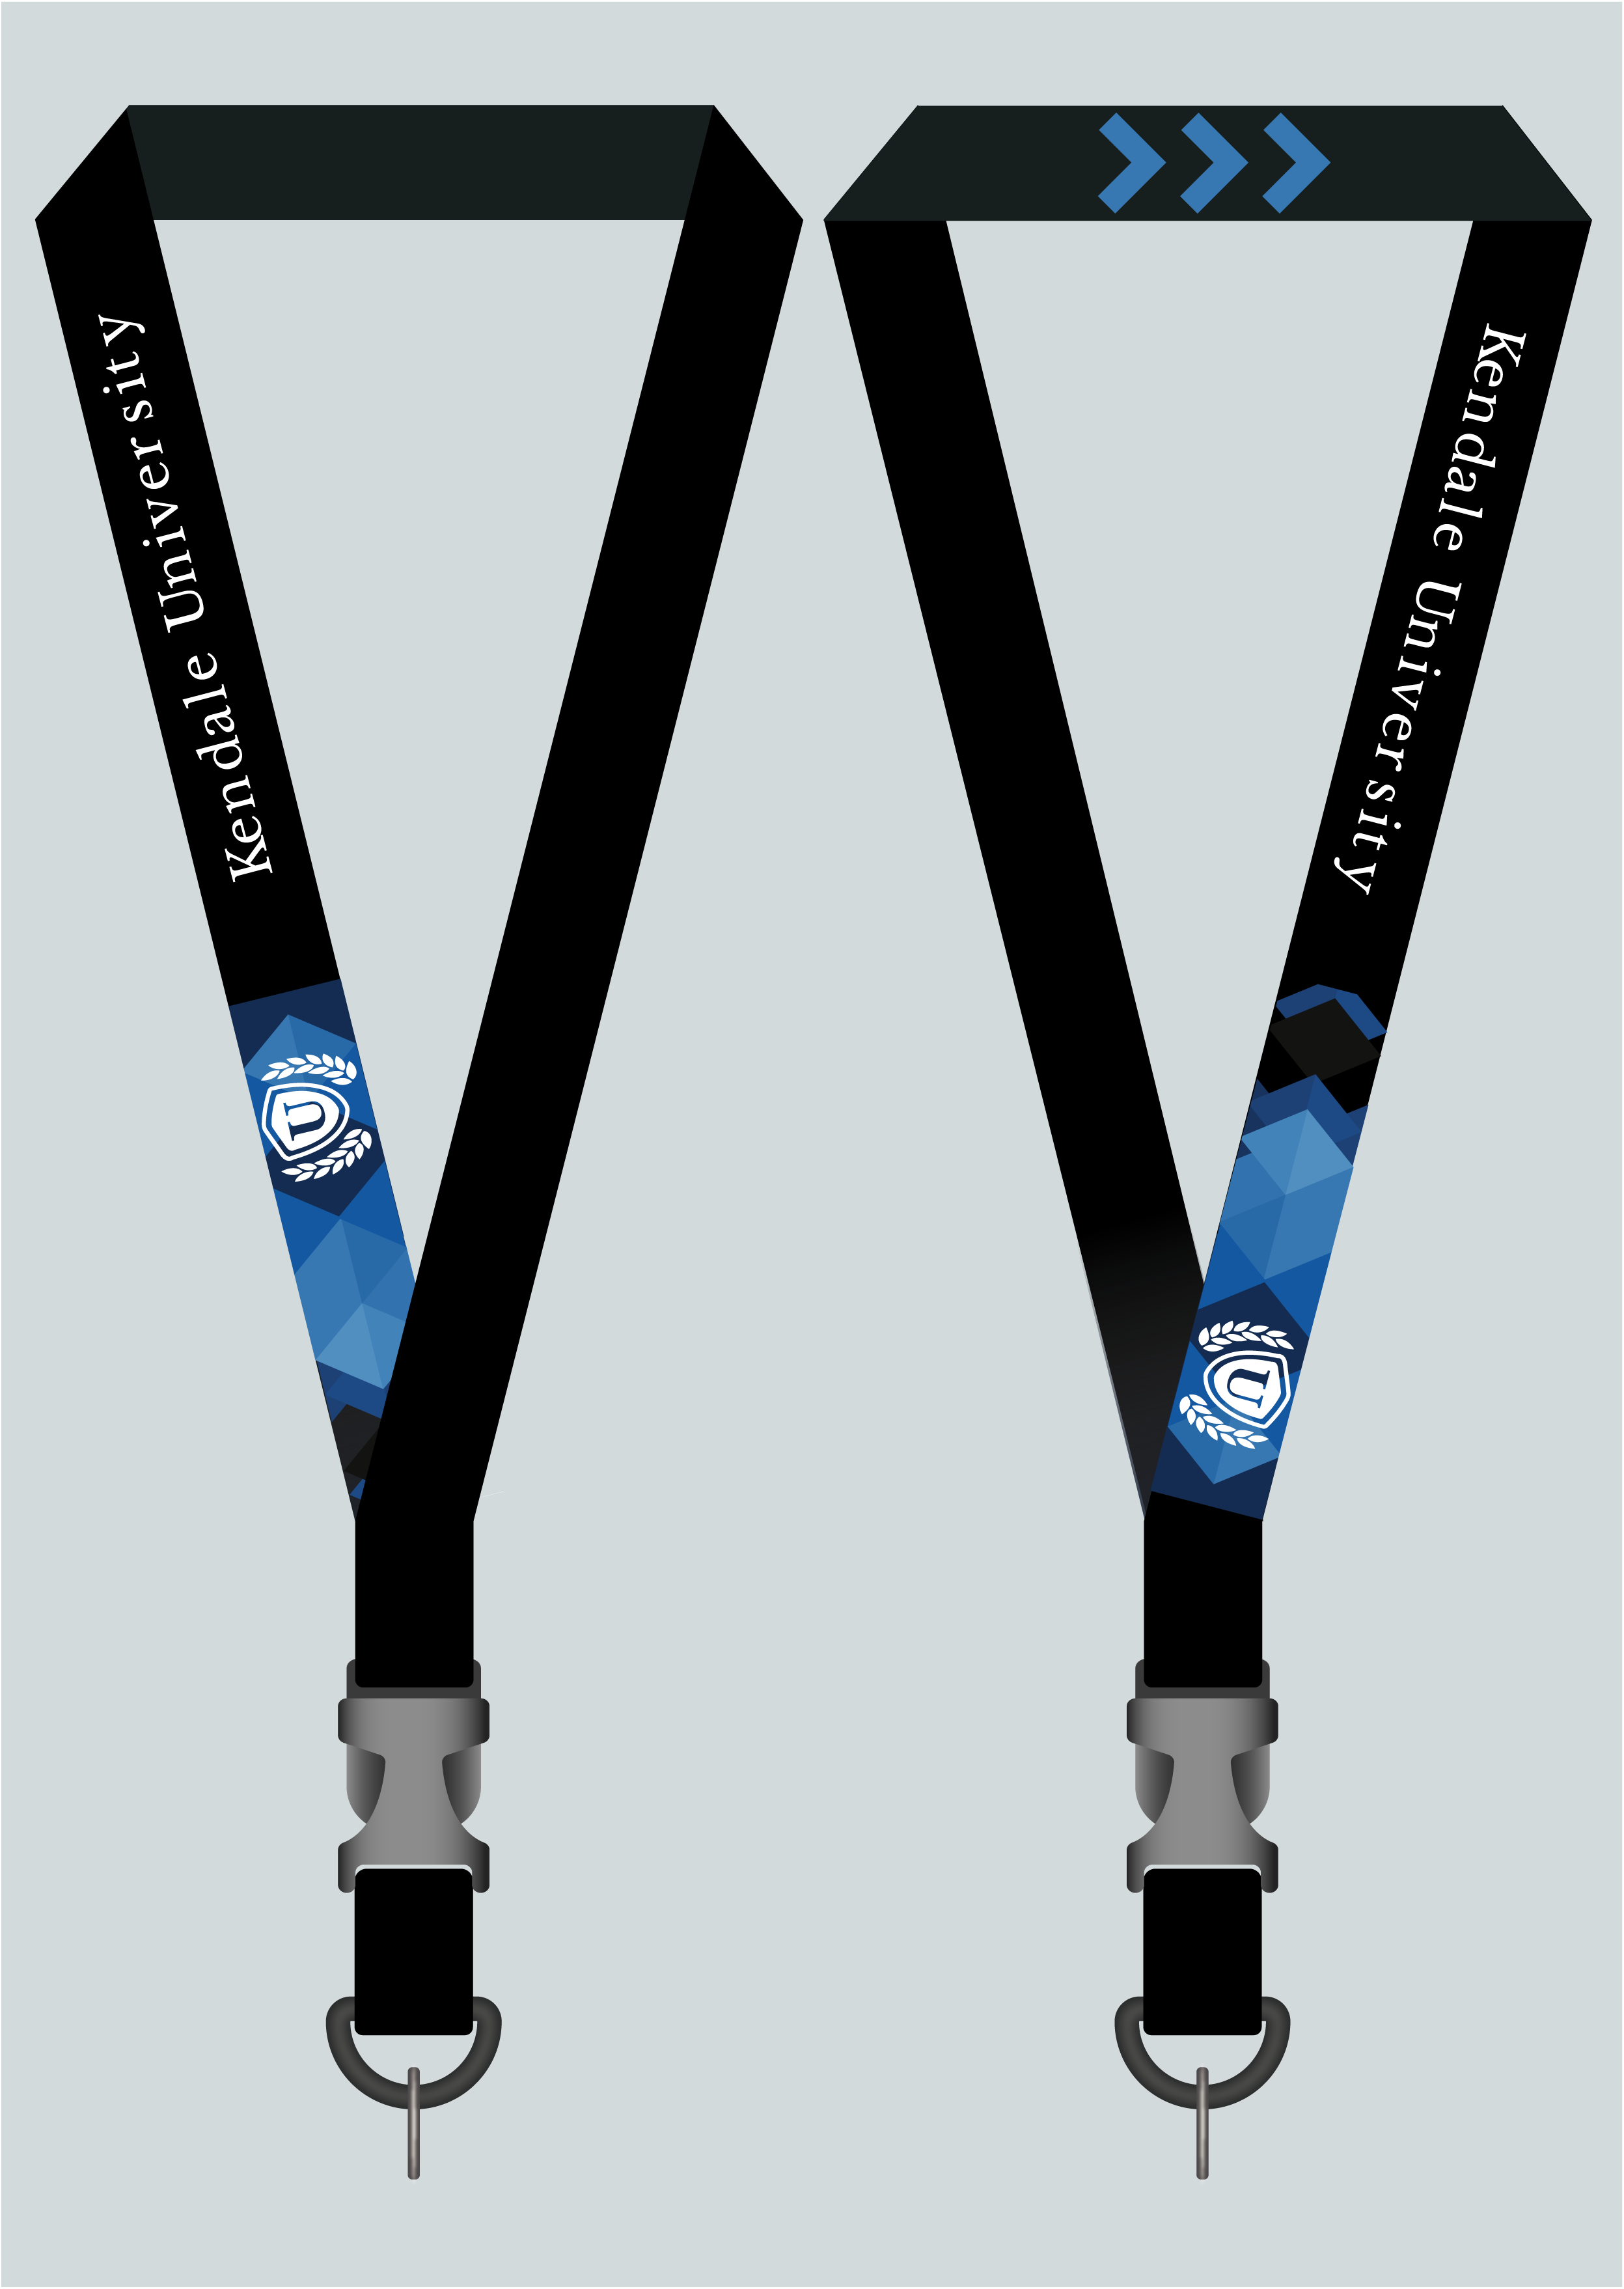 Free Blank Lanyard Template Download in Illustrator, PSD, EPS, SVG